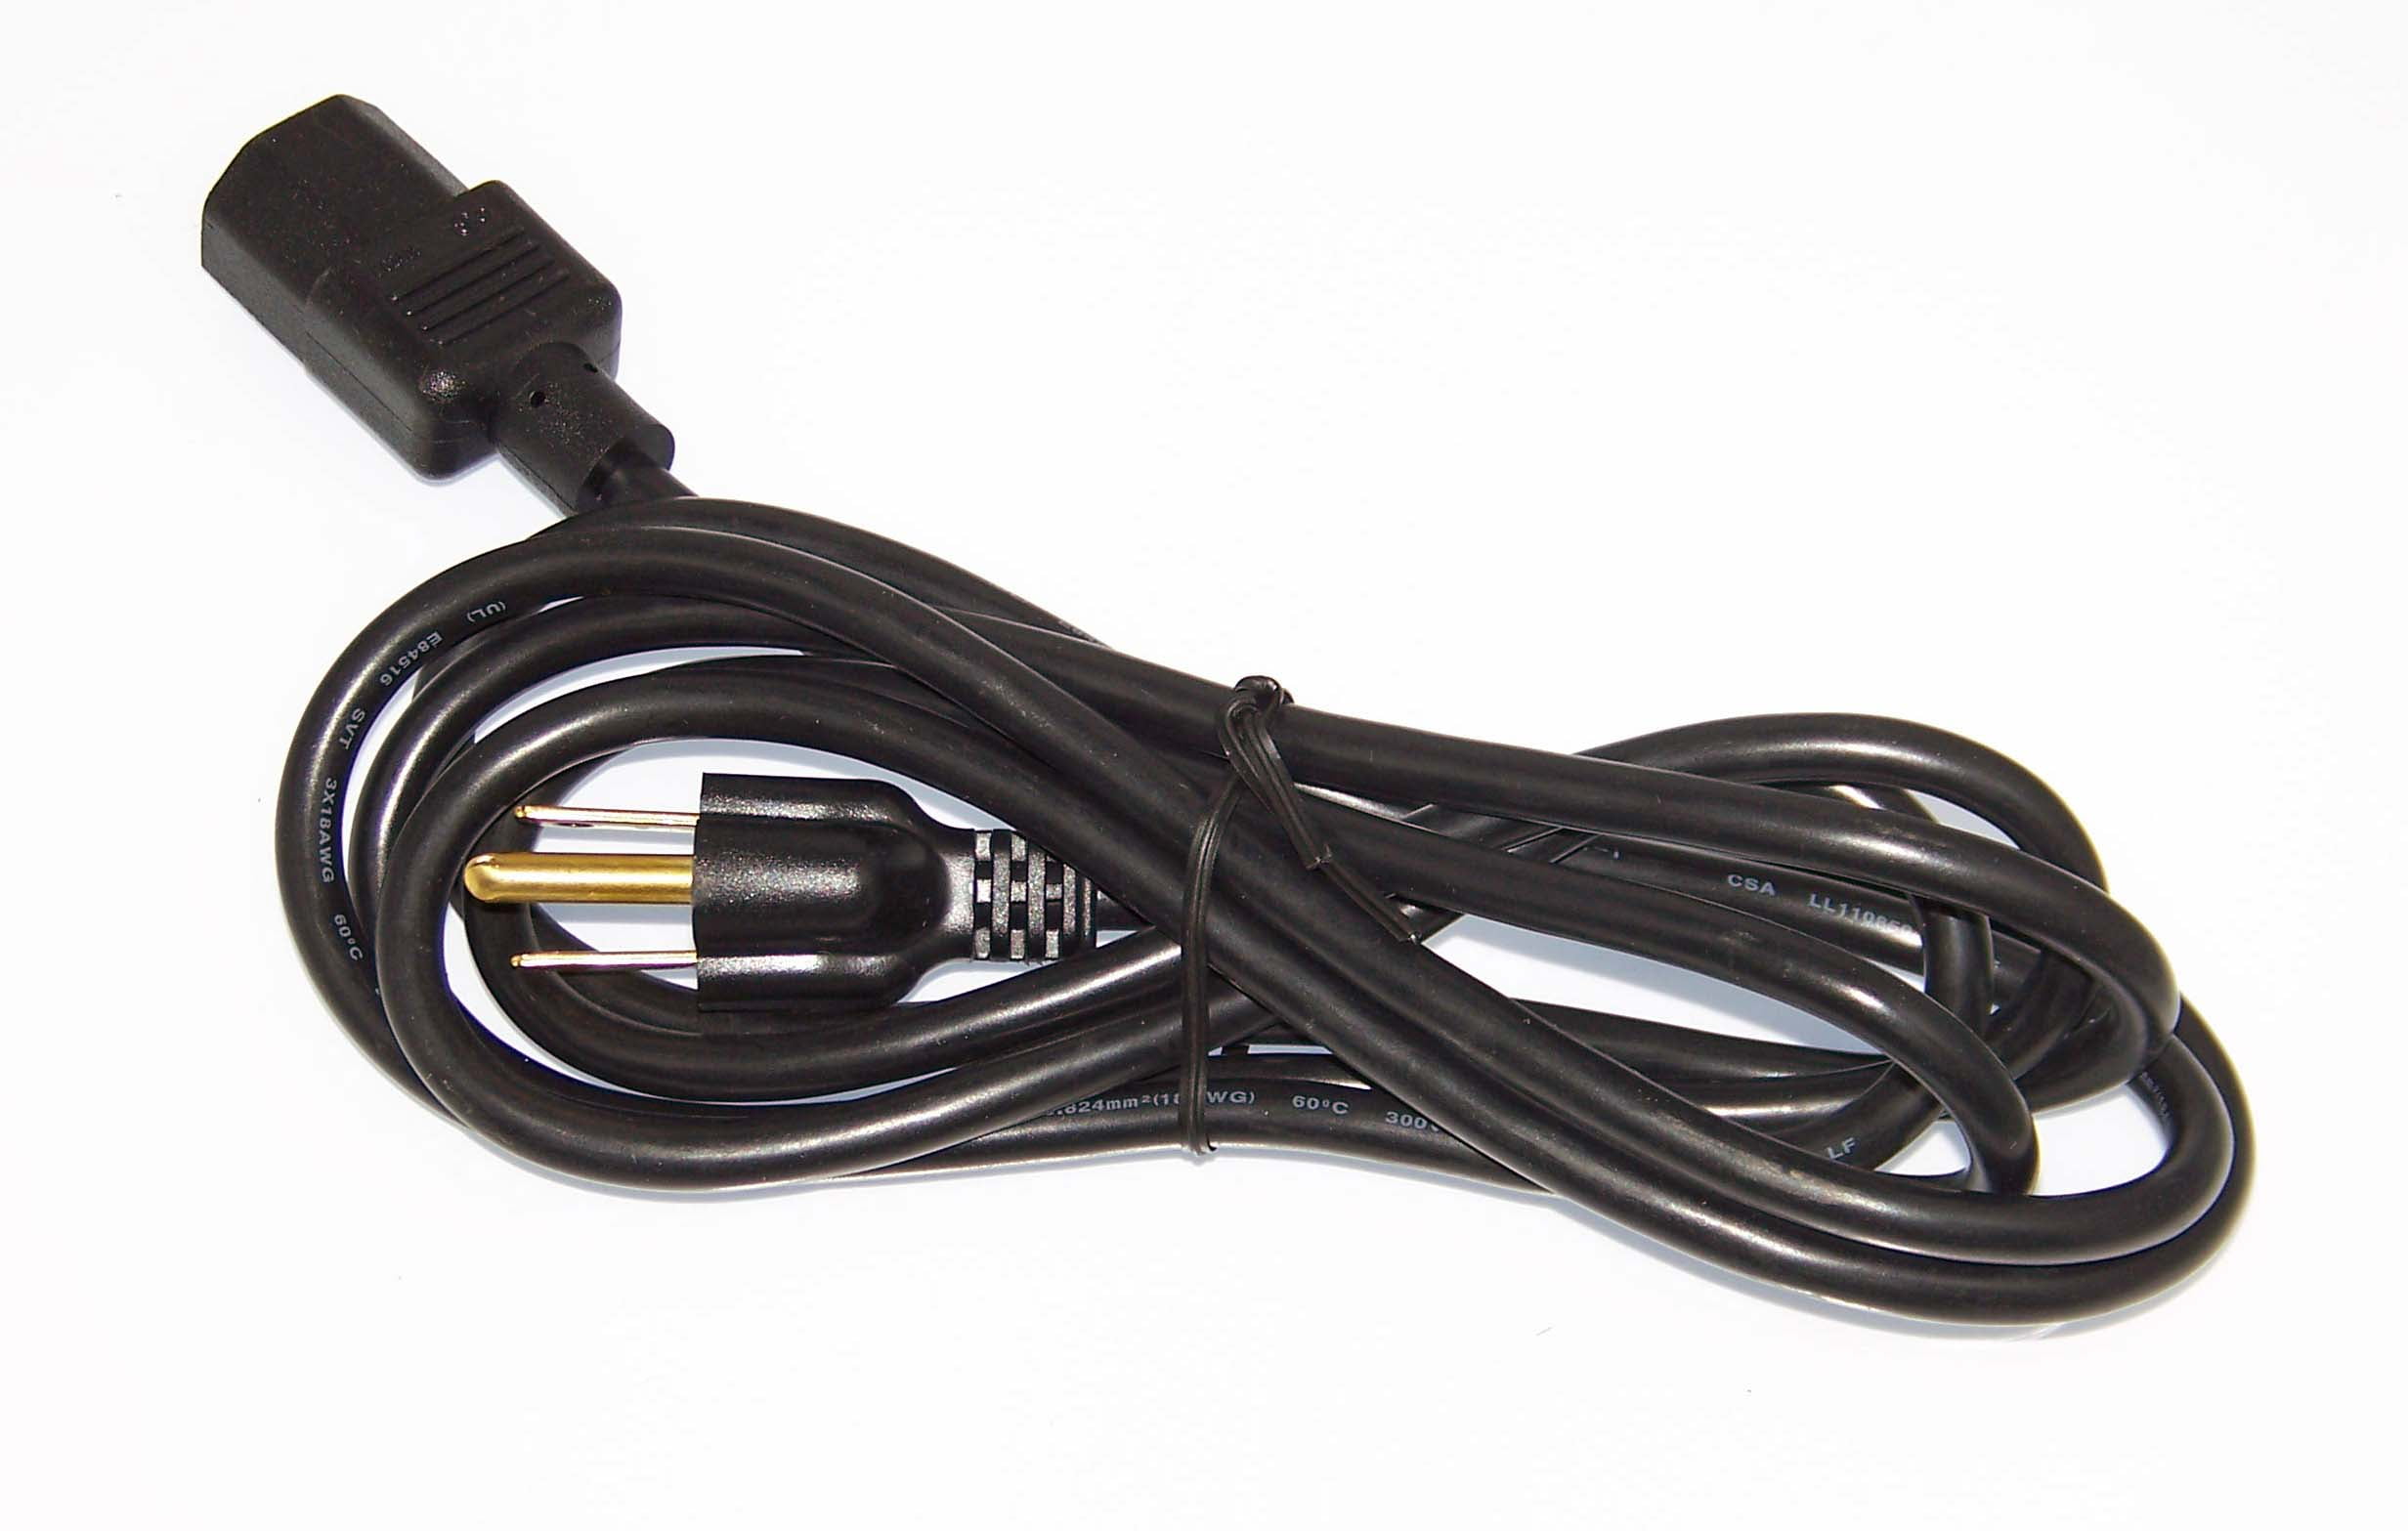 12ft AC Power Cord Cable for Epson Workforce Pro WP-4520 WP-4530 WP-4533 Printer 